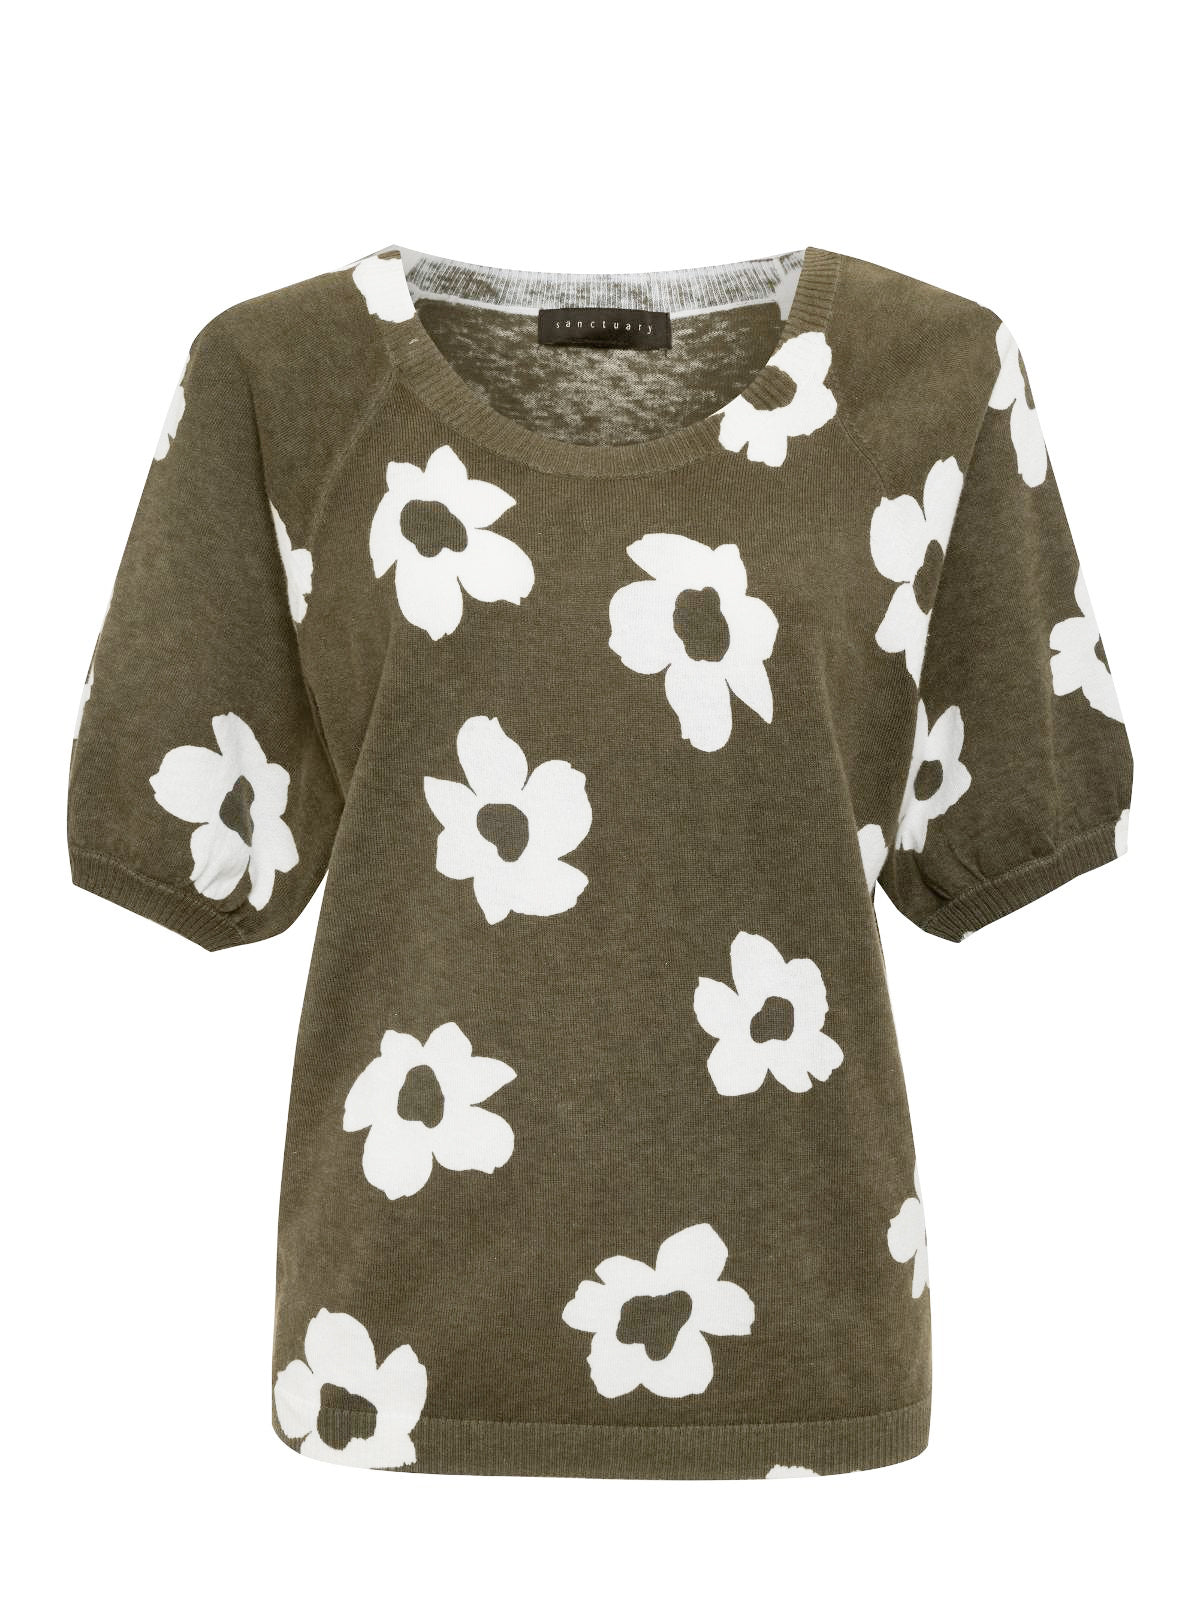 Sunny Days Sweater Burnt Olive Pop Inclusive Collection